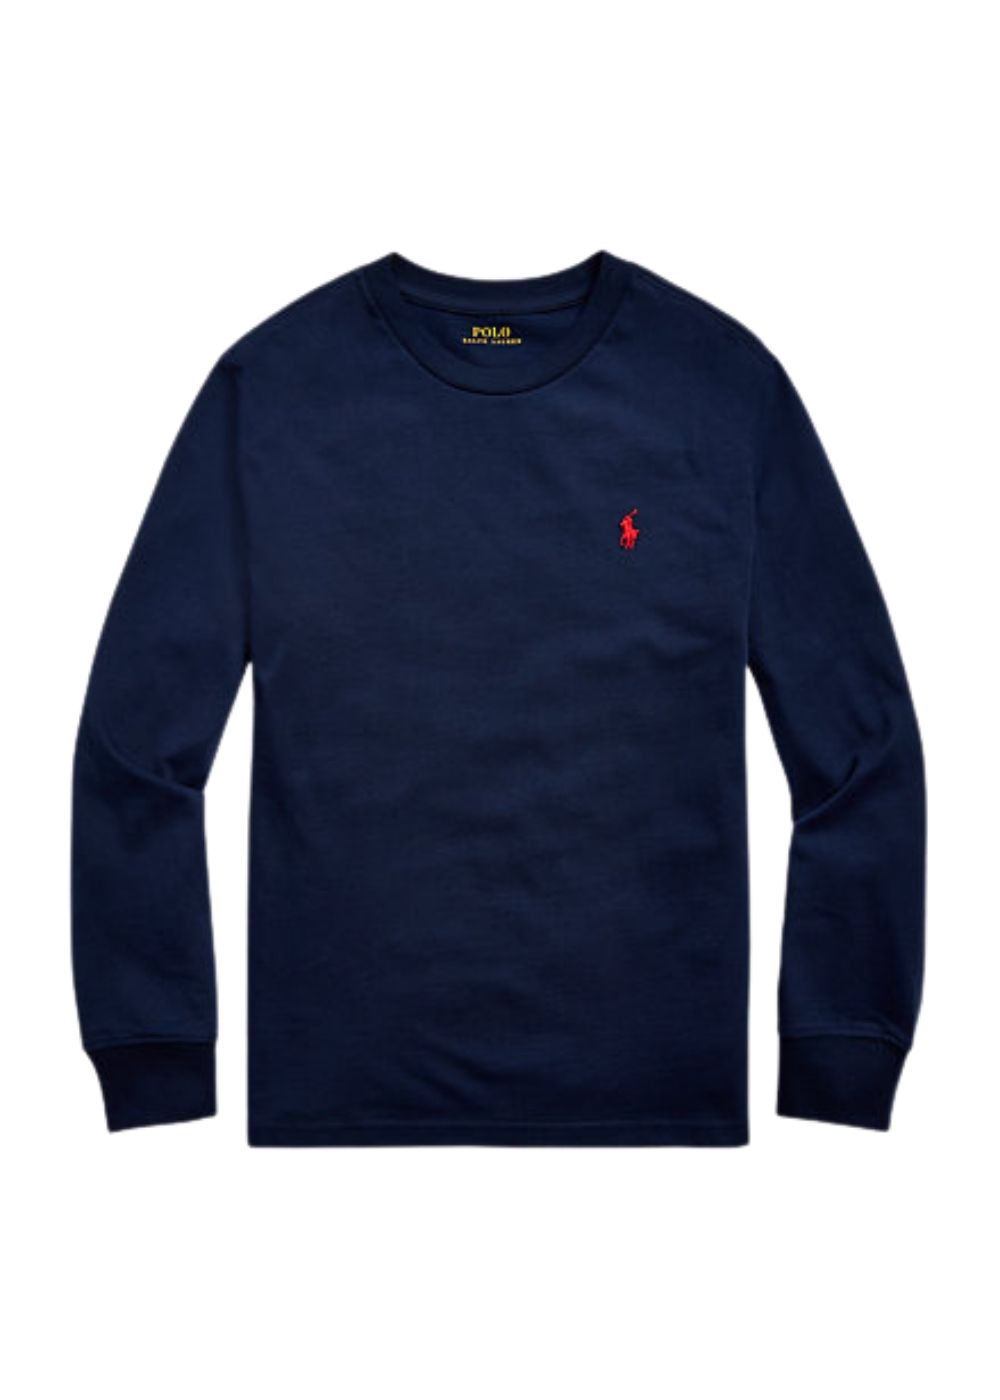 Featured image for “Polo ralph lauren maglietta in Jersey”